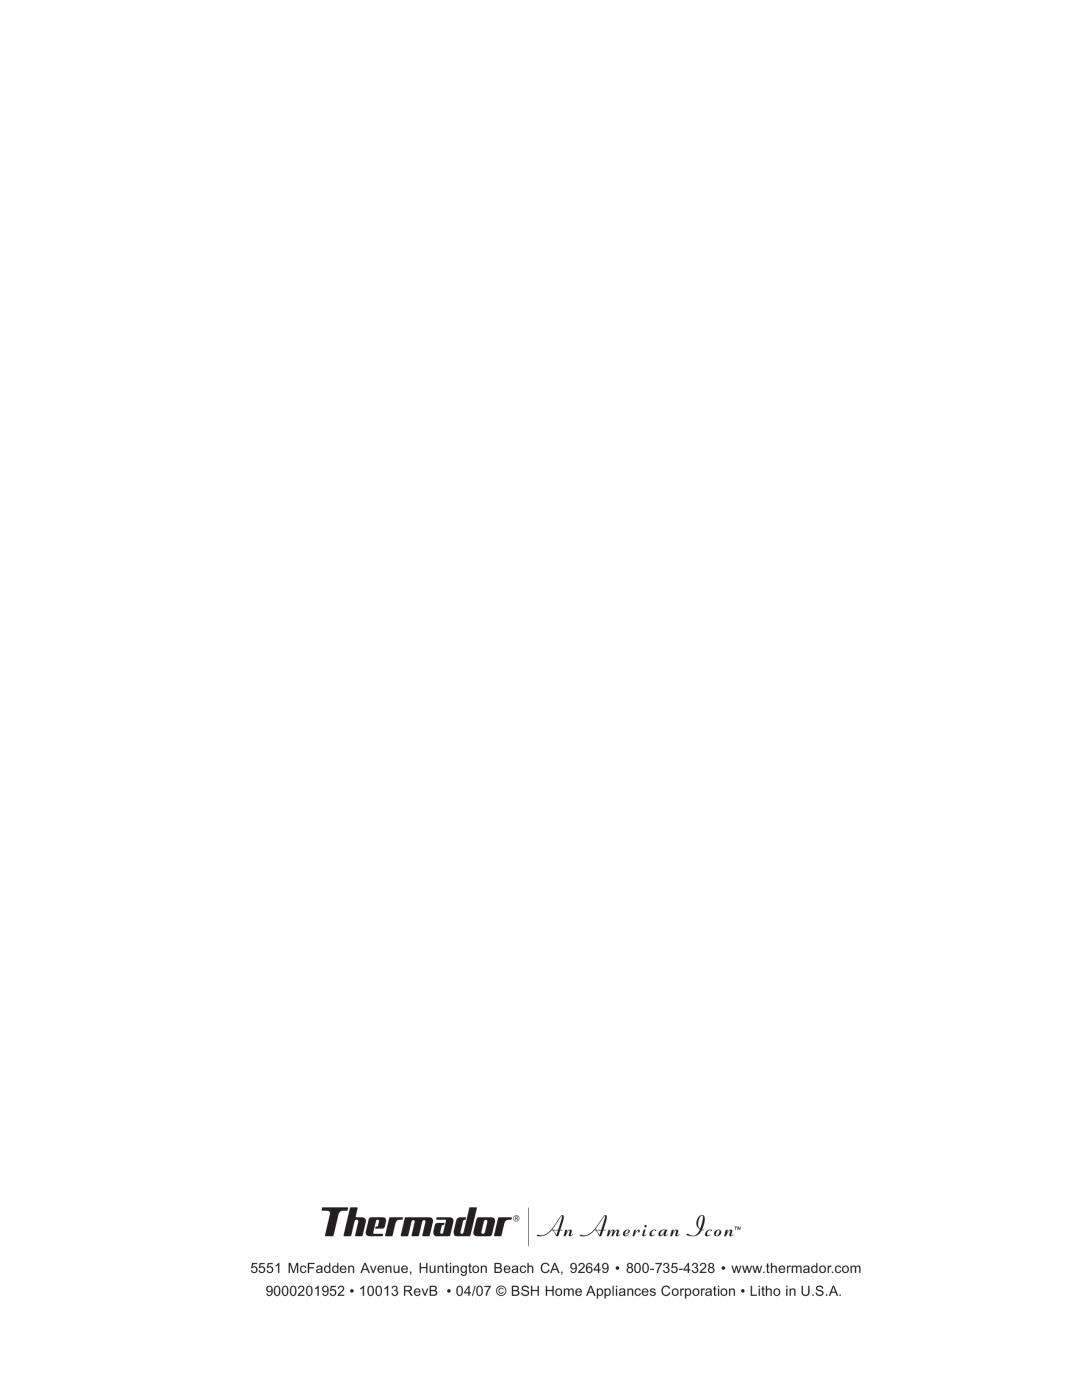 Thermador VCI 230/236/248 DS installation manual 